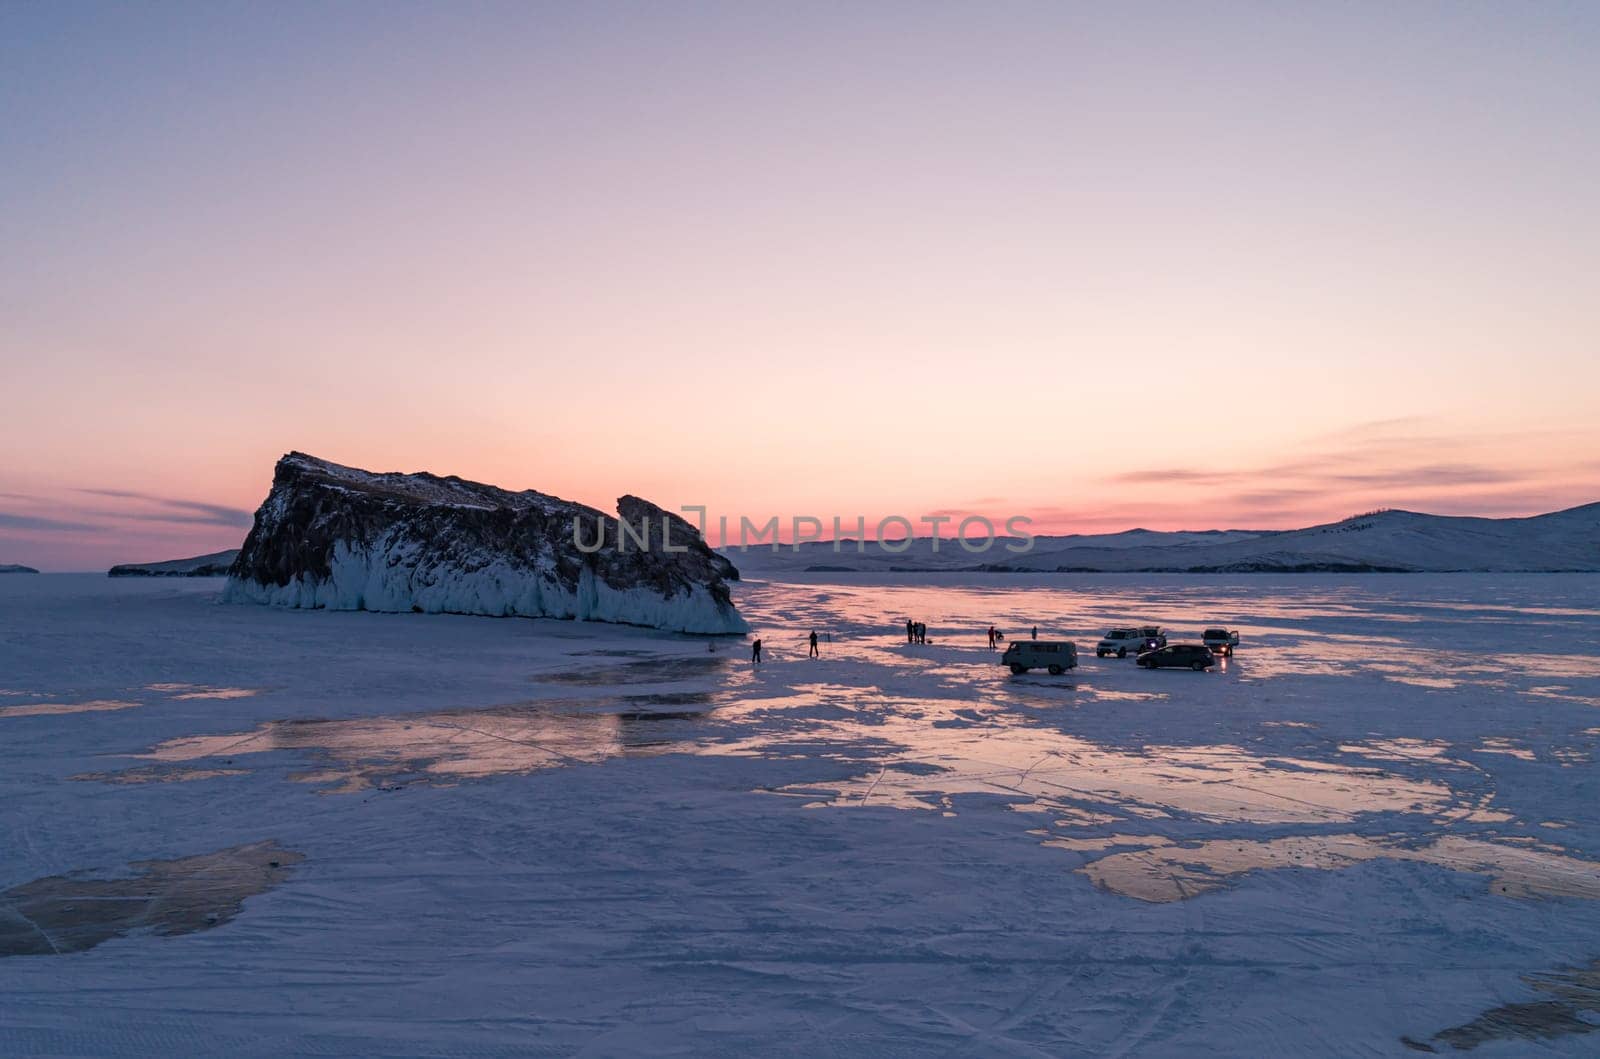 Aerial winter landscape of frozen lake Baikal. Groups of tourists got off the cars and walking around the rocky island in lake Baikal, walking on the crystal clear ice at sunrise. Famous tourist spot by Busker